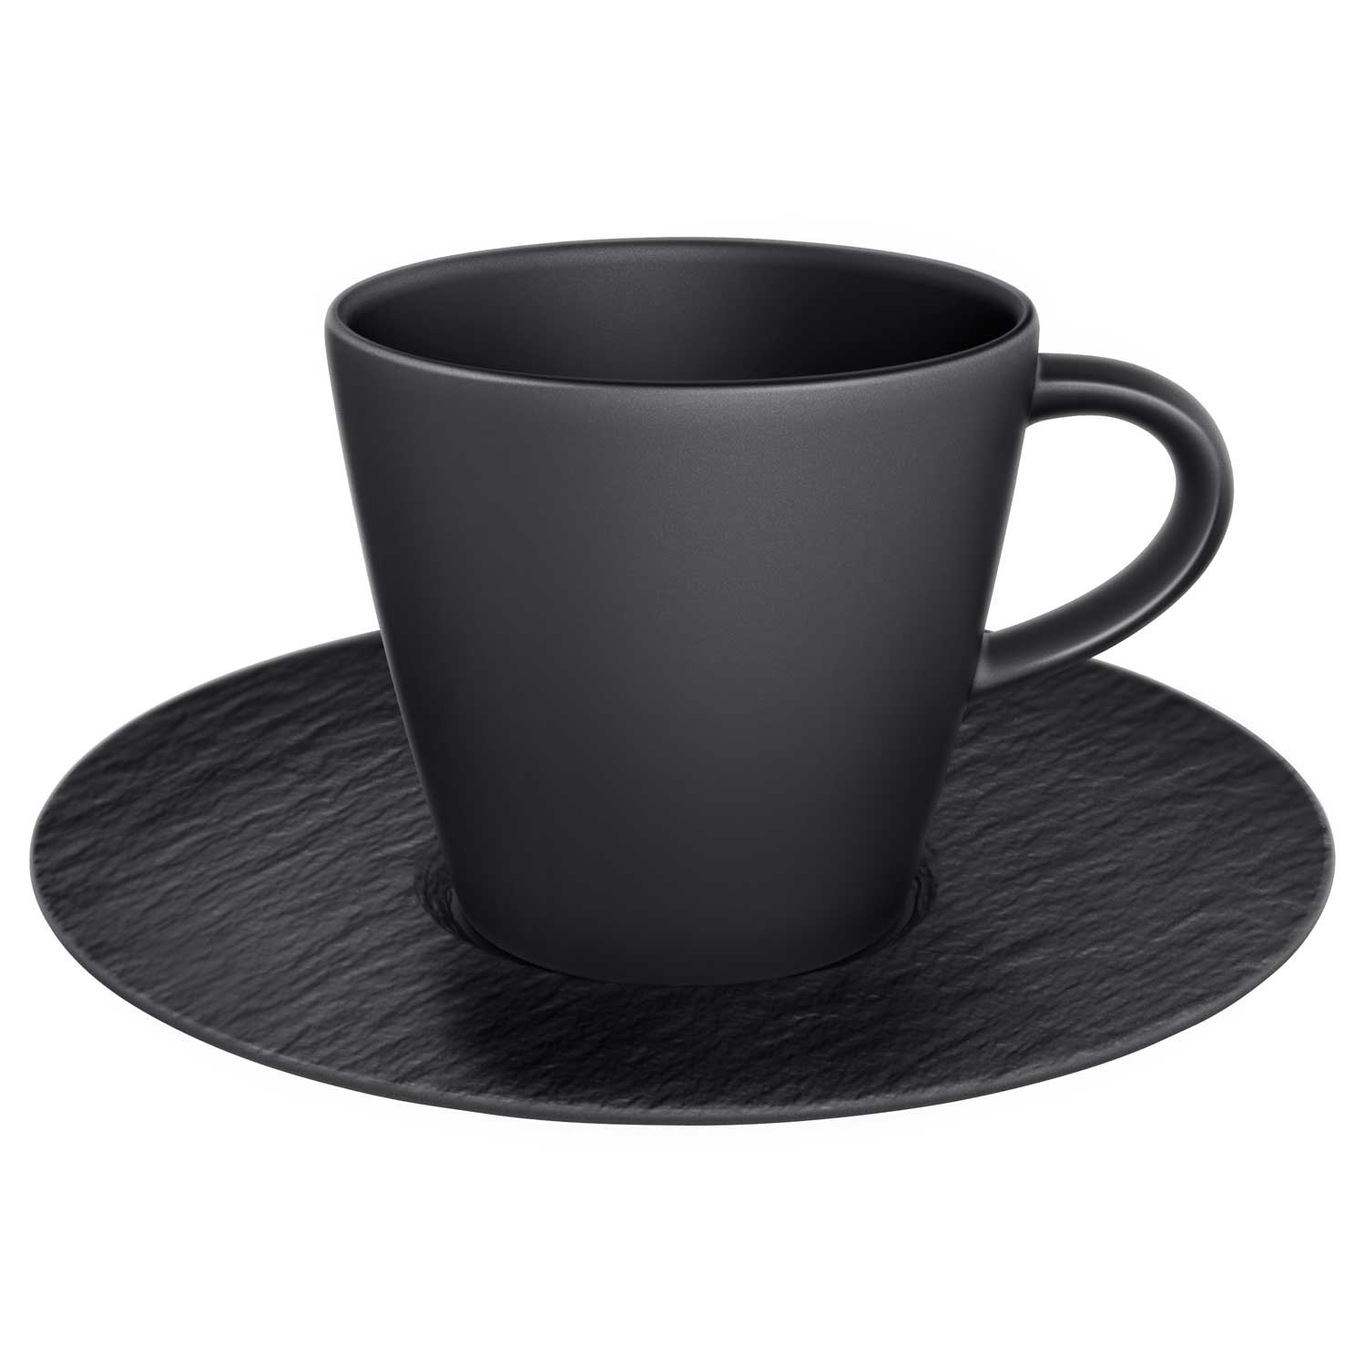 Manufacture Rock Coffee Cup, Black 22 cl